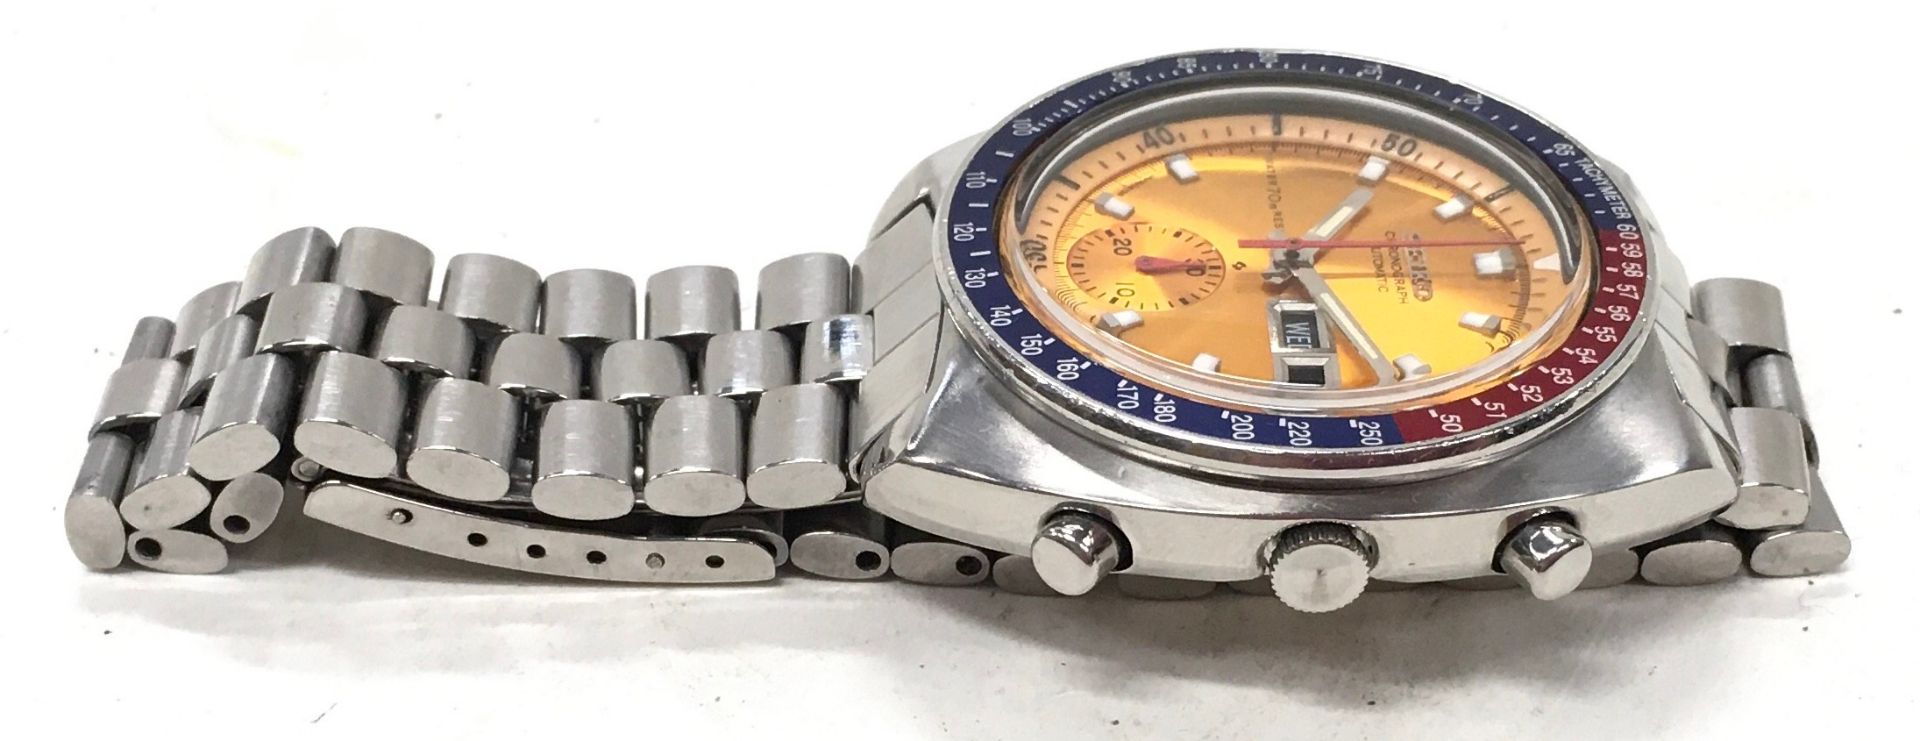 Collectible Seiko 6139-6002 'Pogue' automatic chronograph. Fully working, chronograph resets to zero - Image 3 of 4